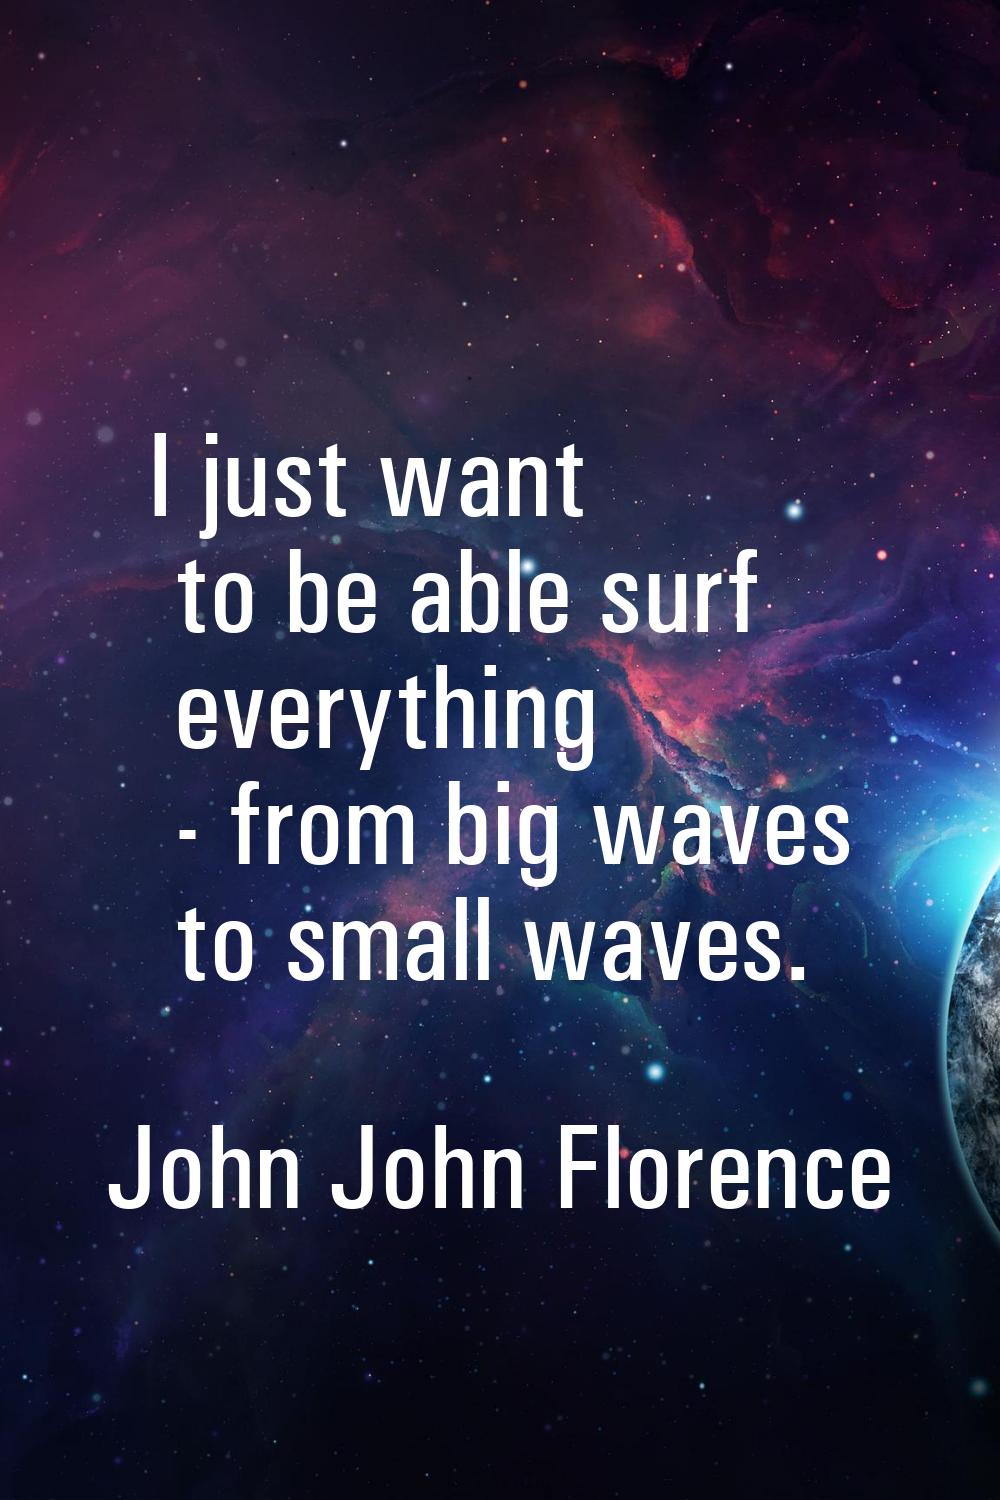 I just want to be able surf everything - from big waves to small waves.